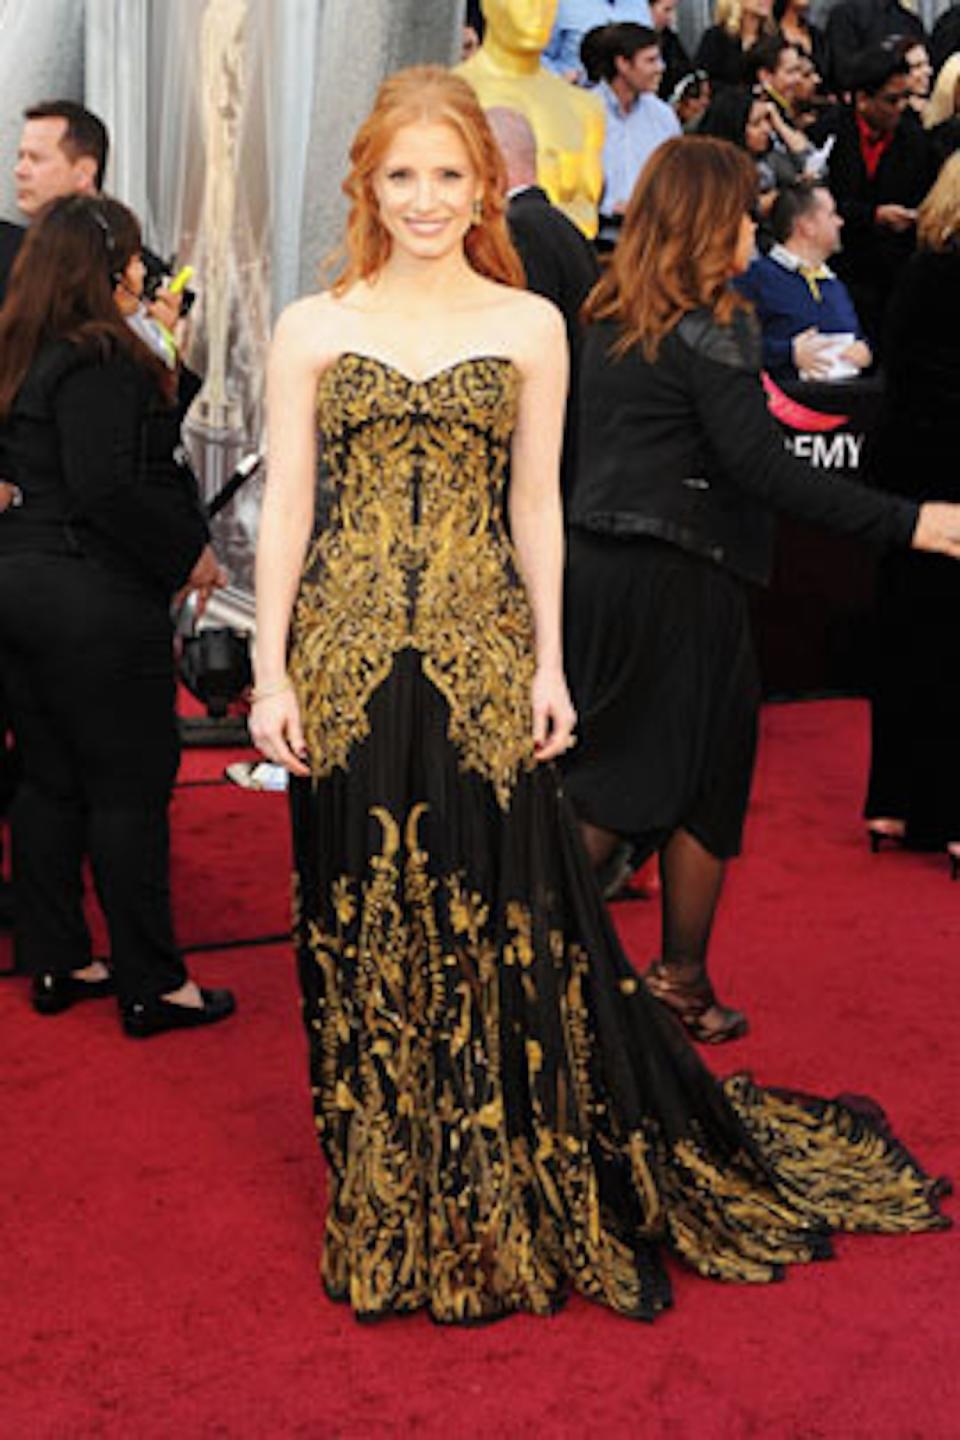 <div class="caption-credit"> Photo by: Getty</div>Jessica Chastain wore $2 million worth of Harry Winston jewelry paired with her ravishing gold Alexander McQueen gown to the Oscars in 2012. <br>